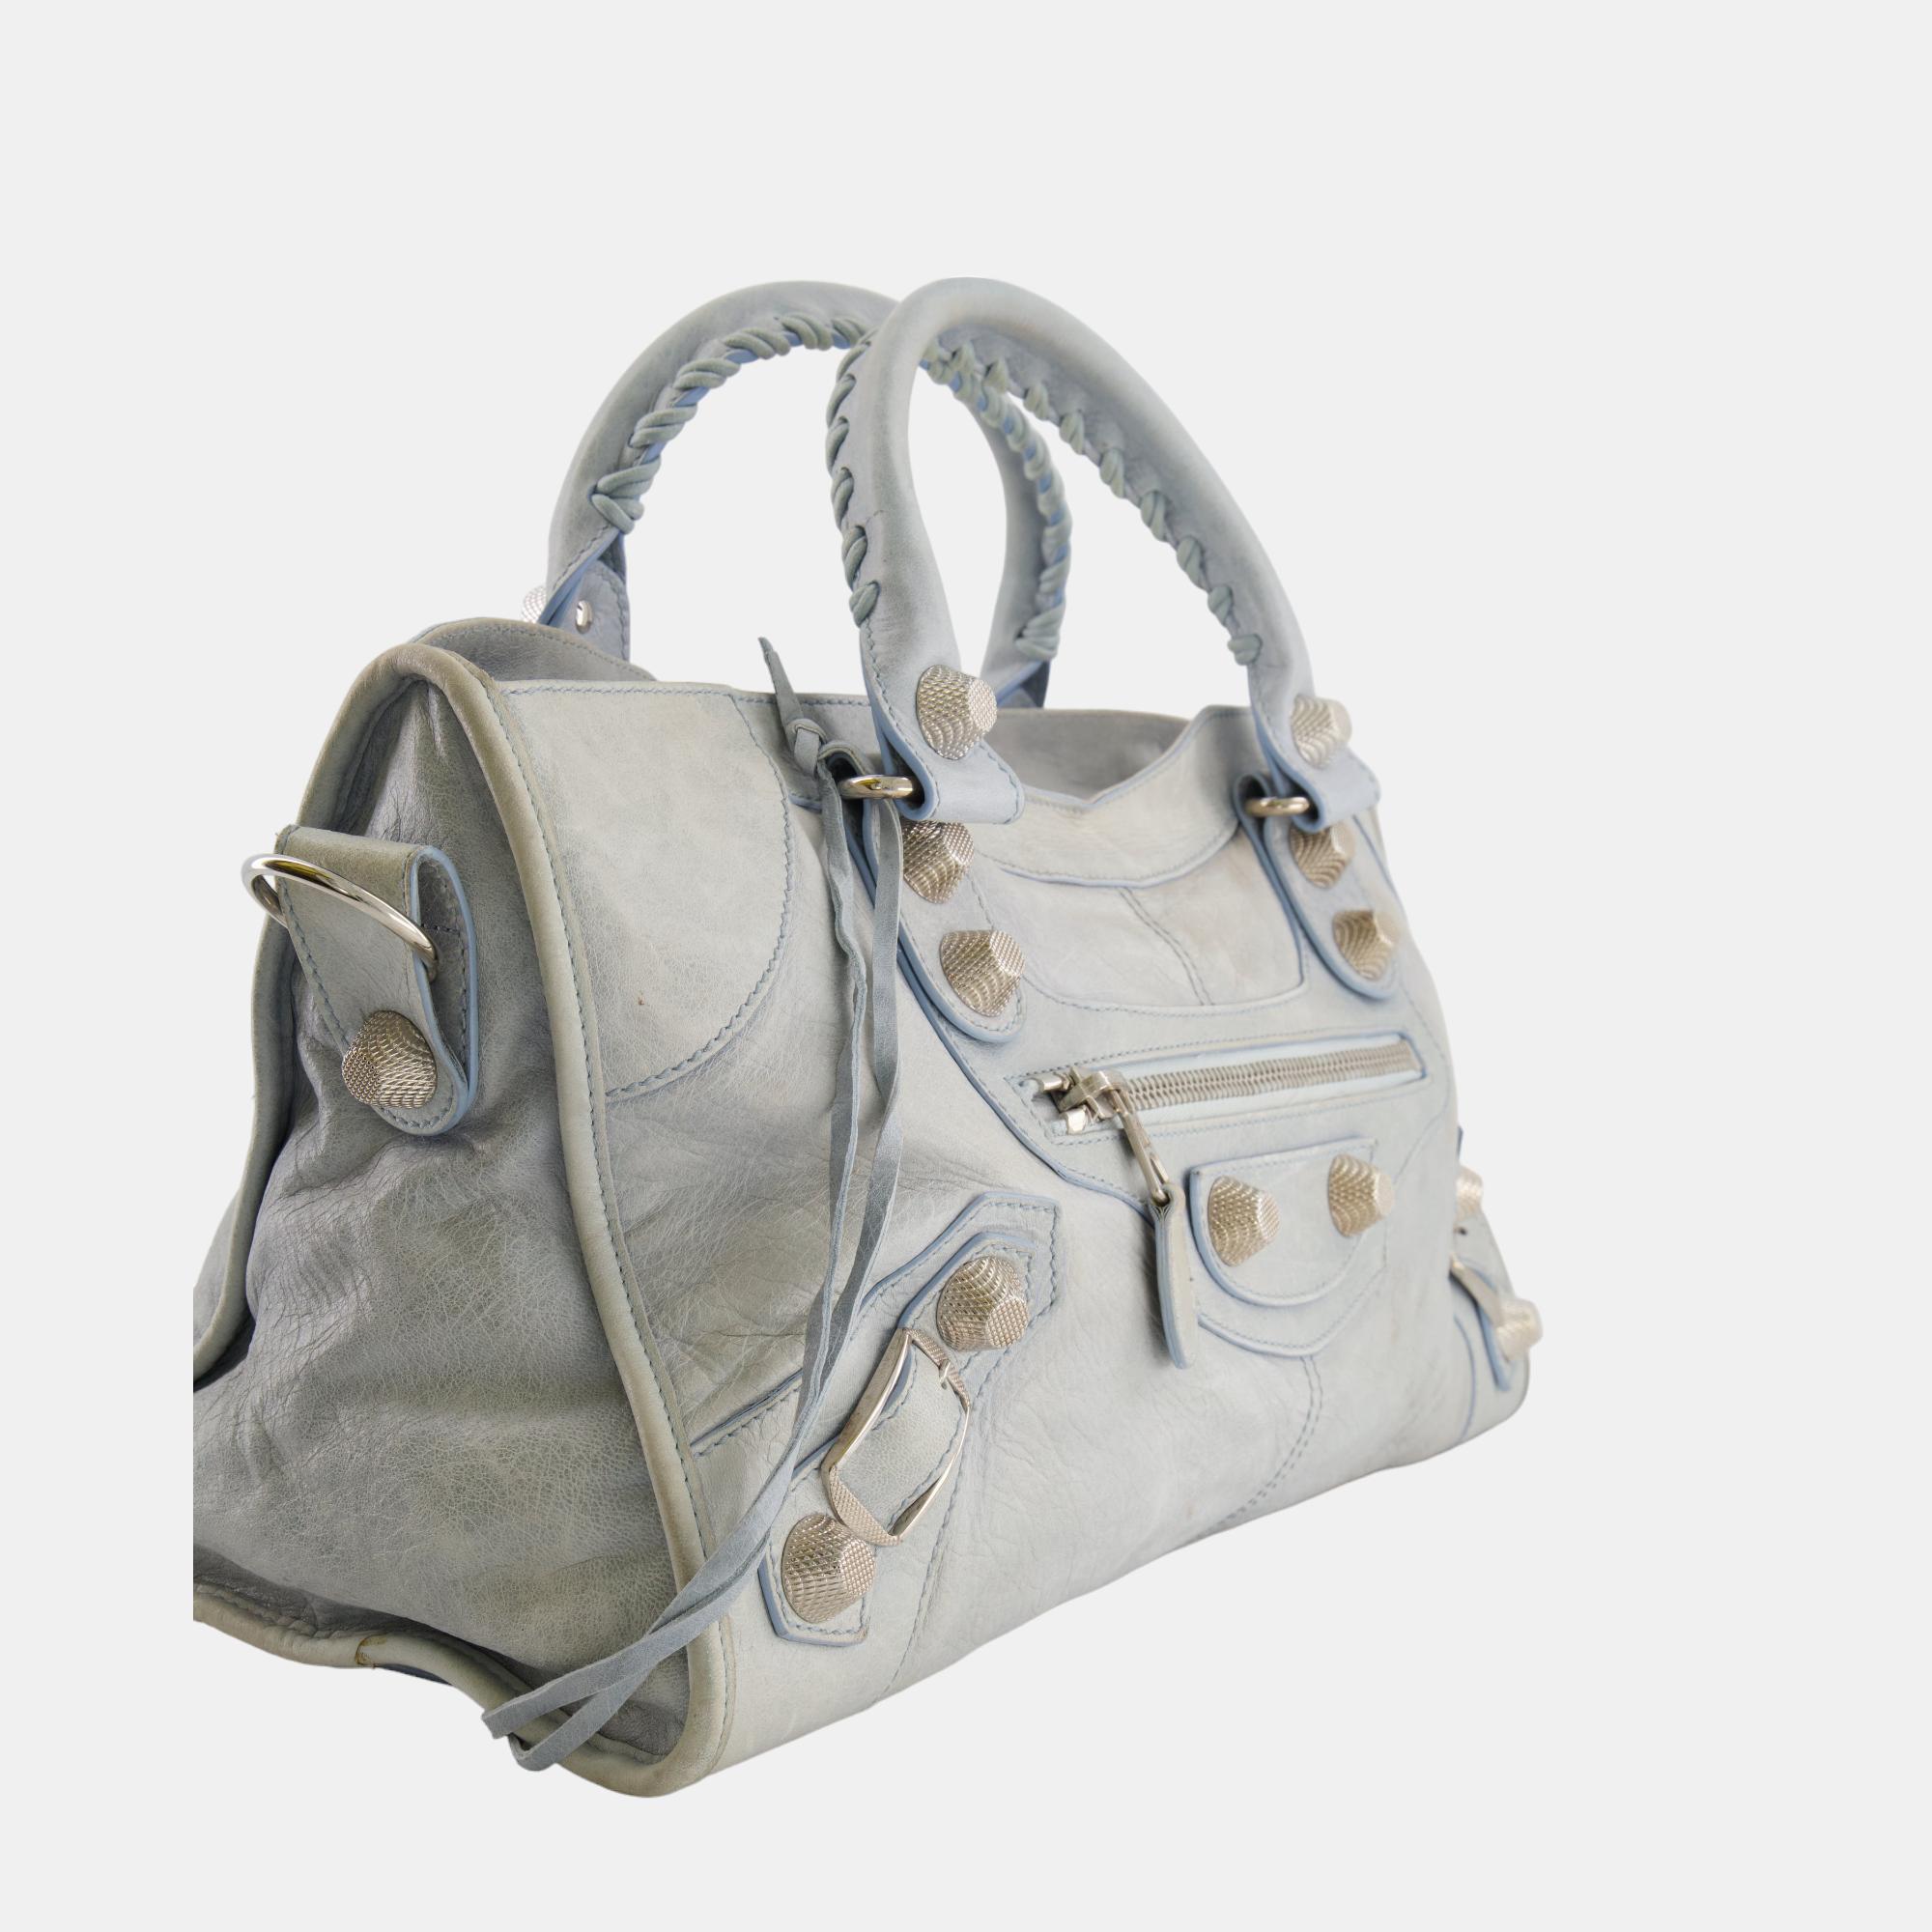 Balenciaga Ice Blue Large Leather City Bag With Silver Hardware